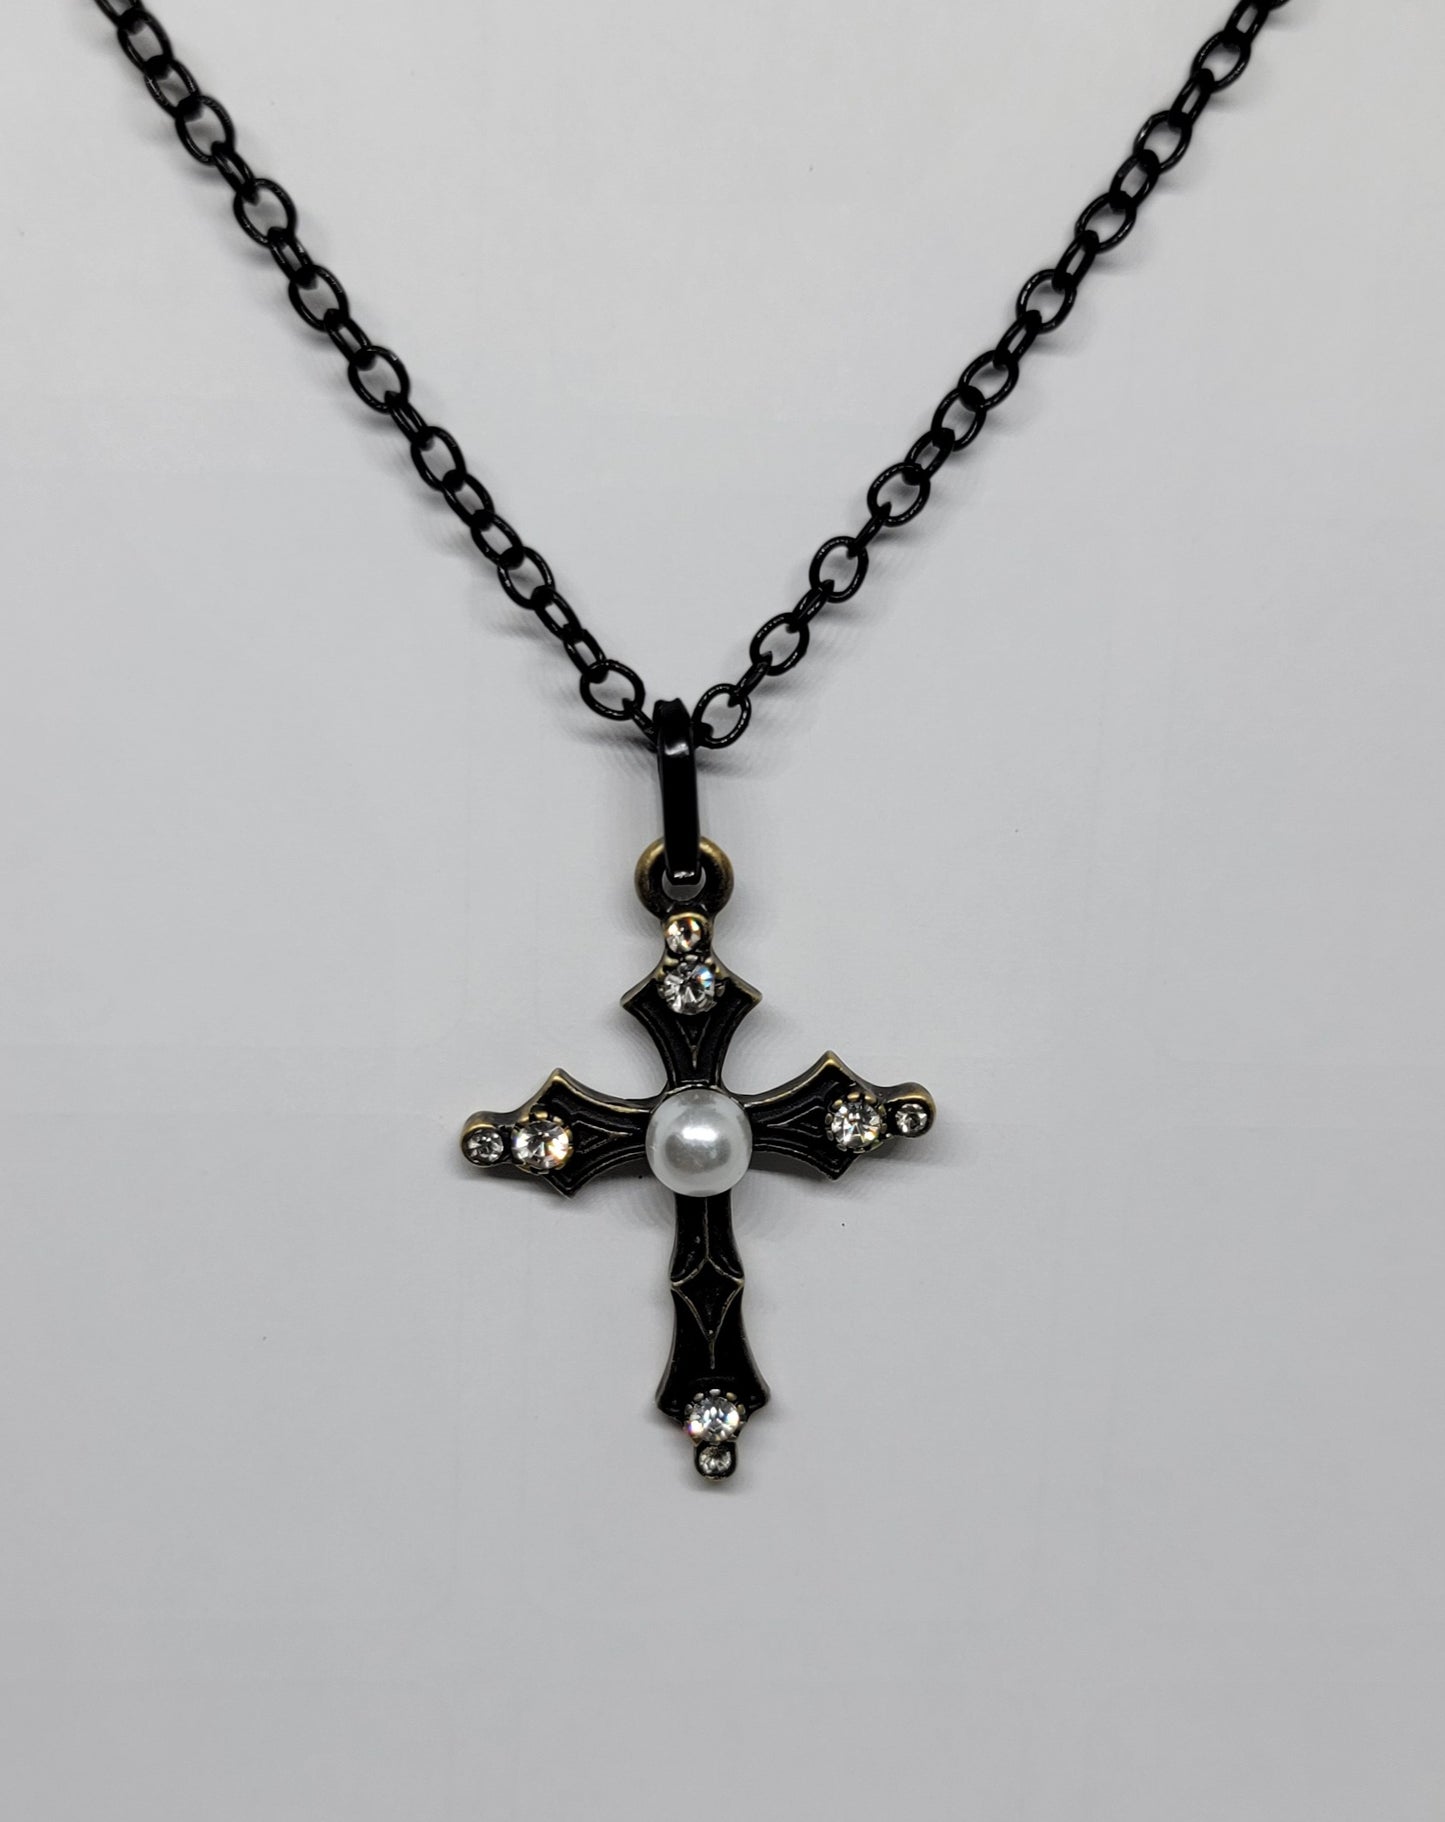 Blackish necklace with pearl and rhinestones